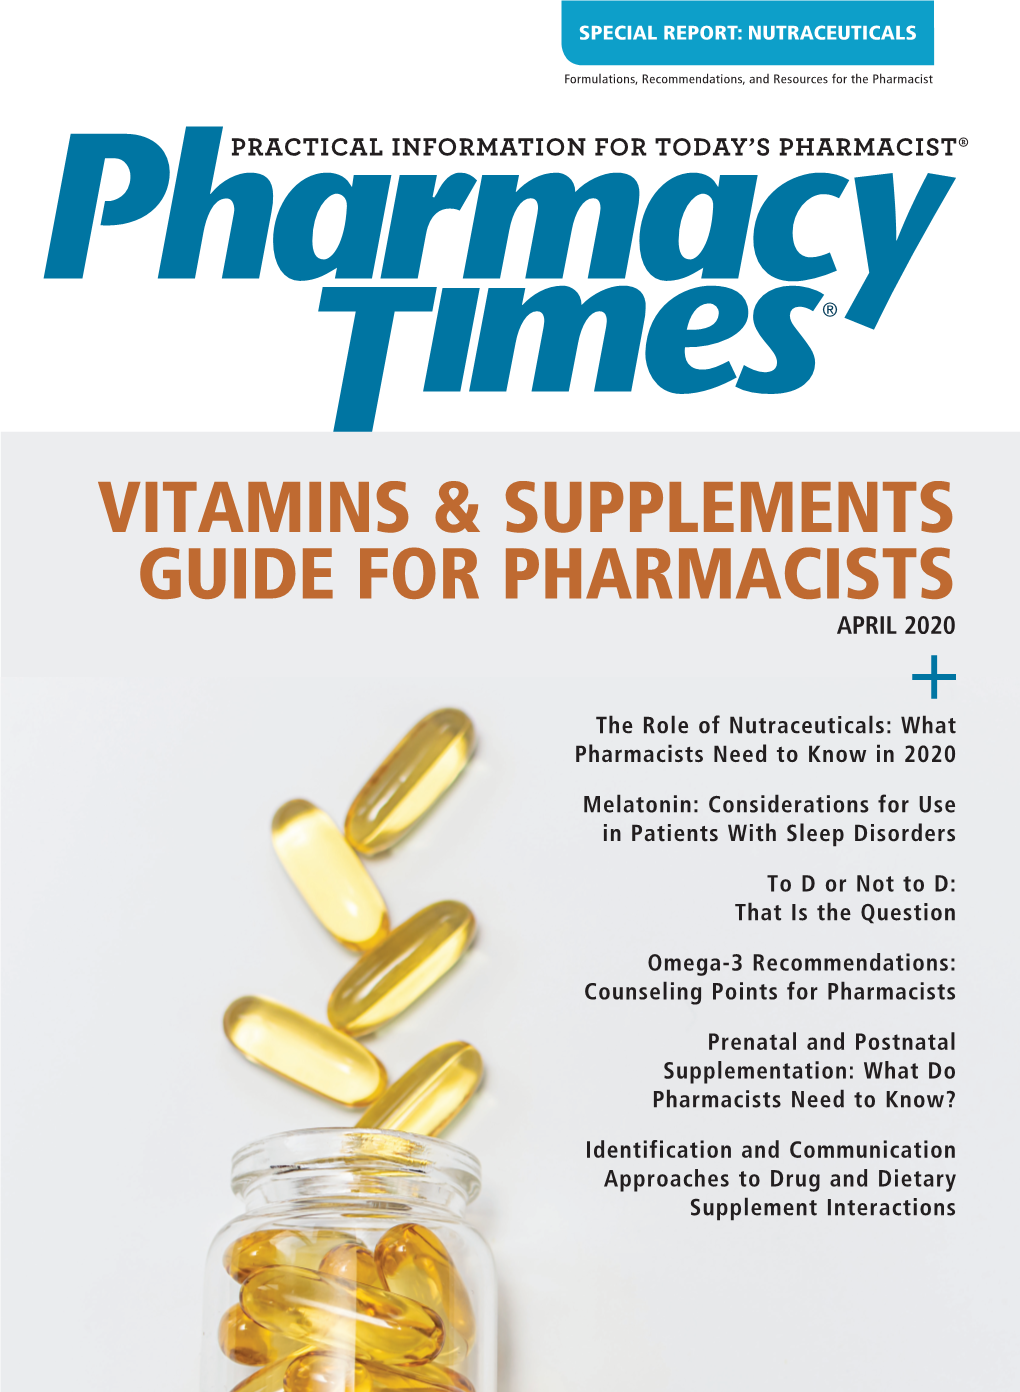 Vitamins & Supplements Guide for Pharmacists